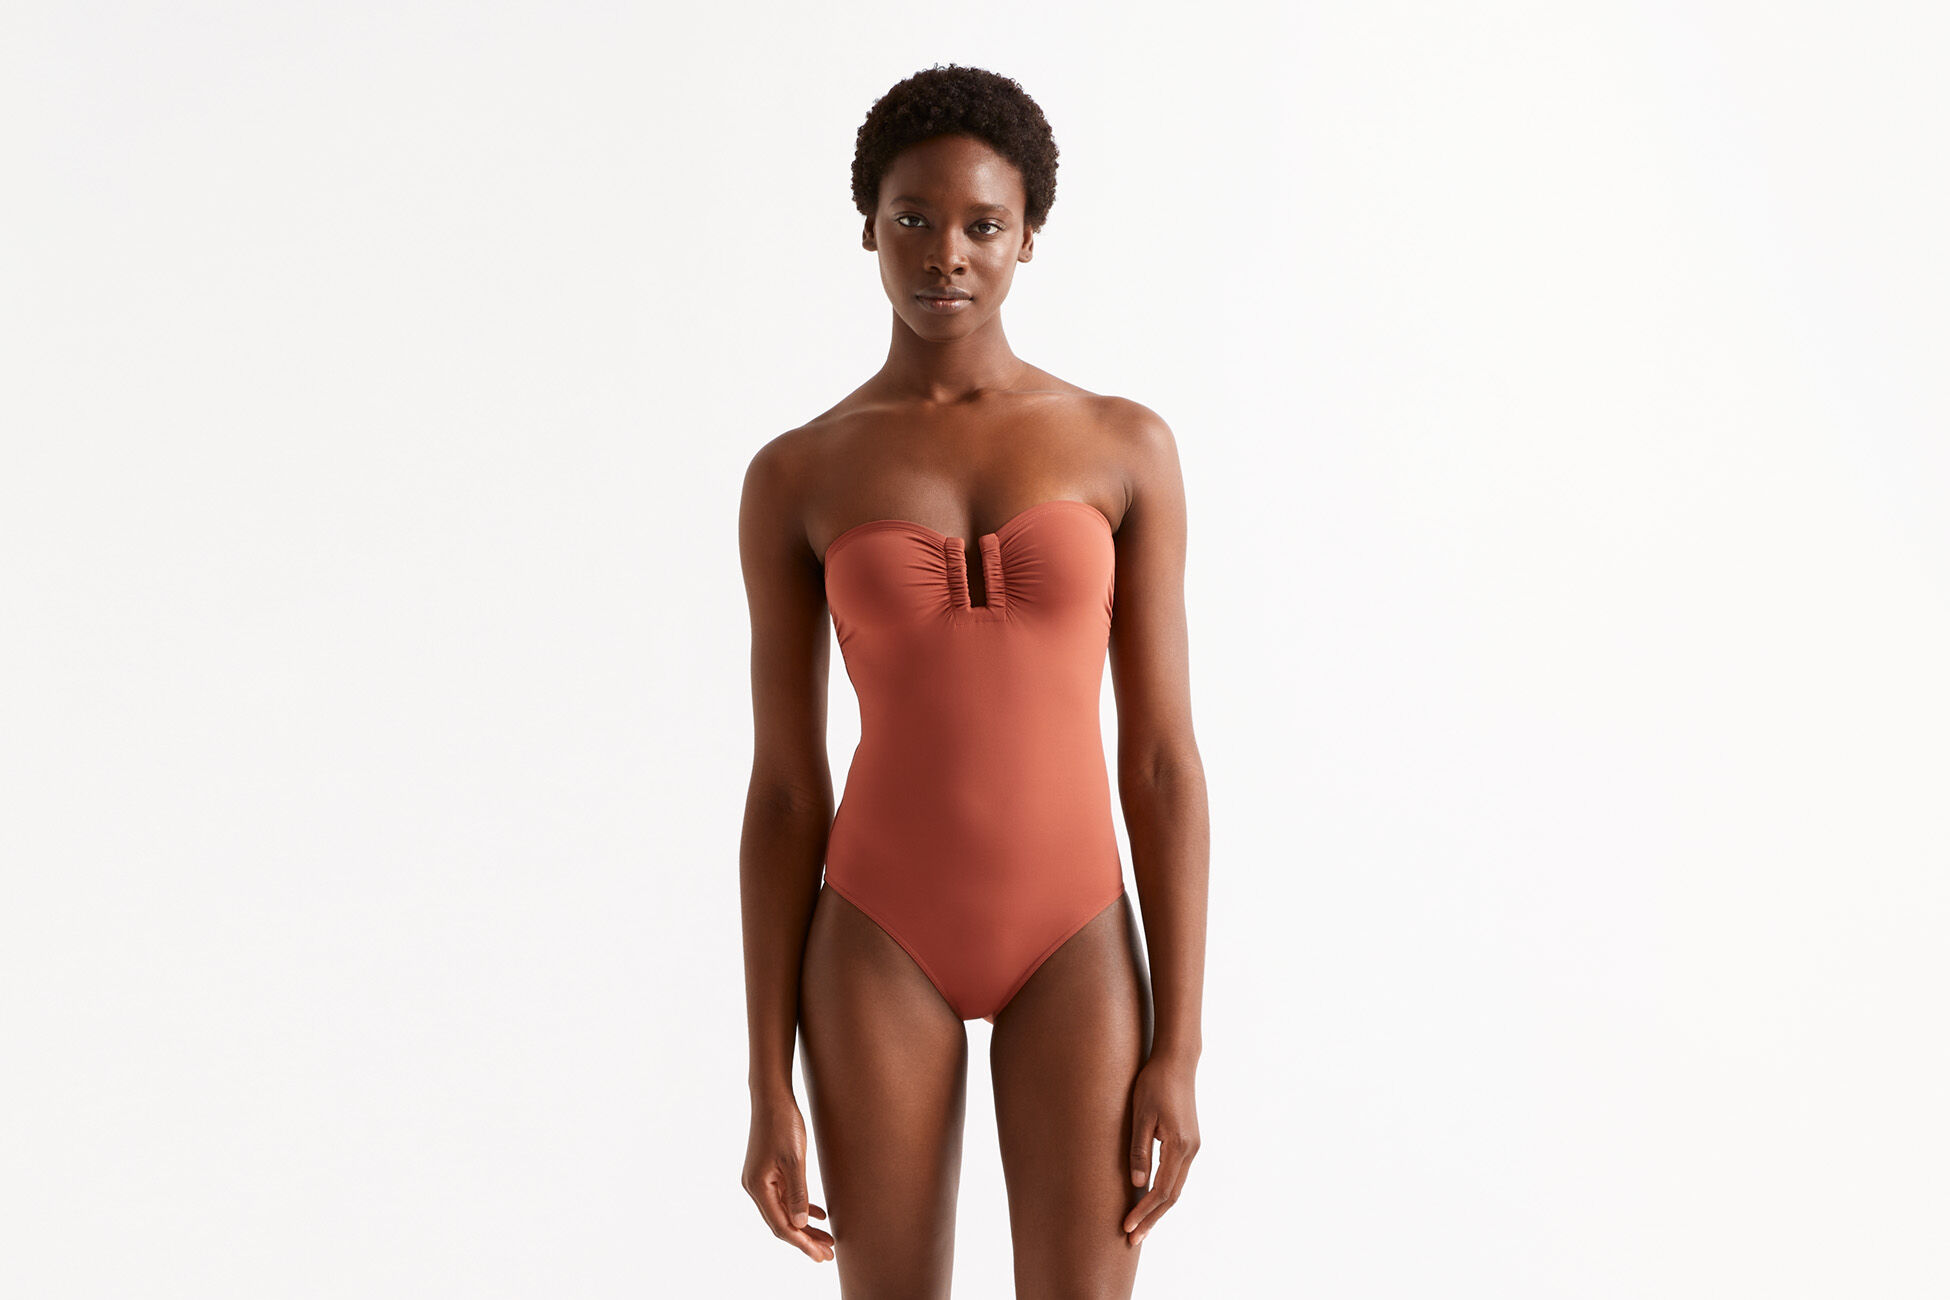 Cassiopee Bustier one-piece standard view �